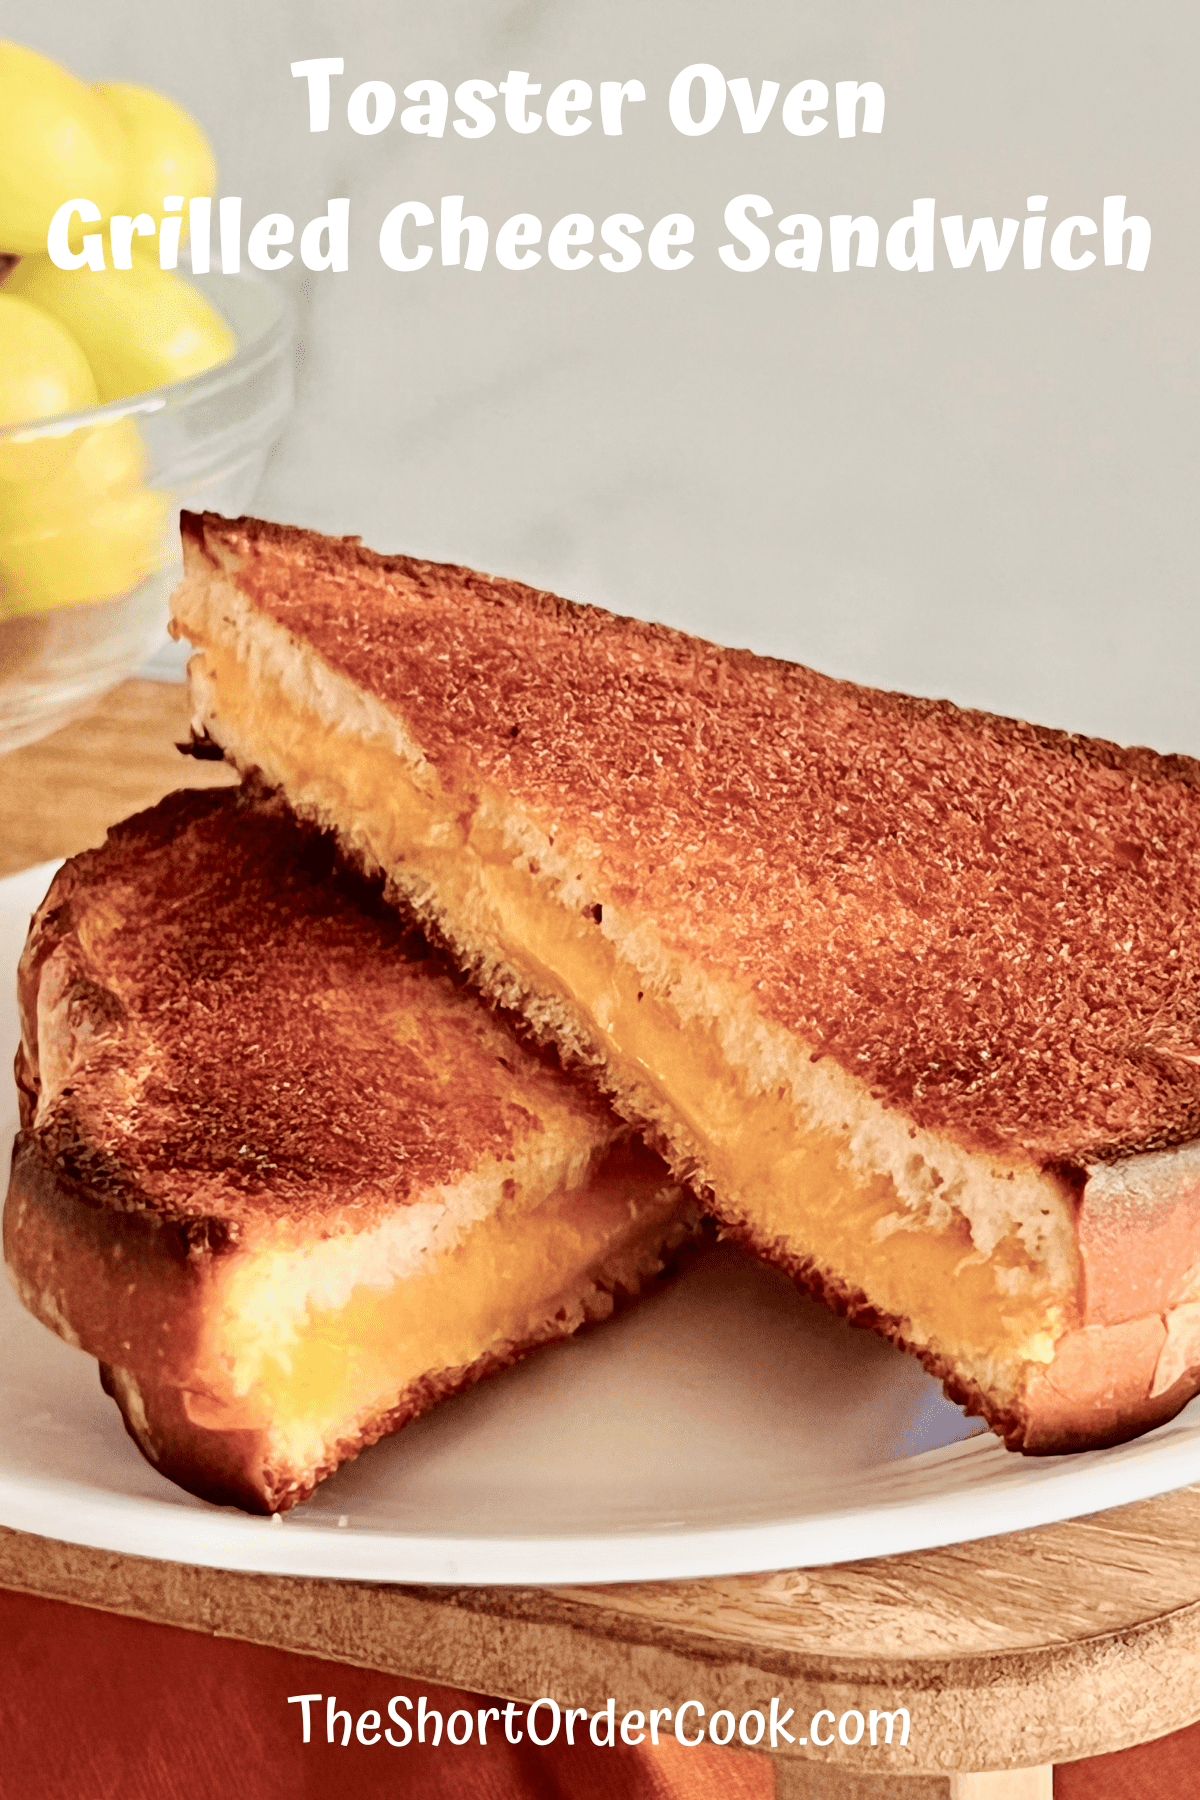 How Do You Make the Perfect Grilled Cheese in a Toaster Oven Today